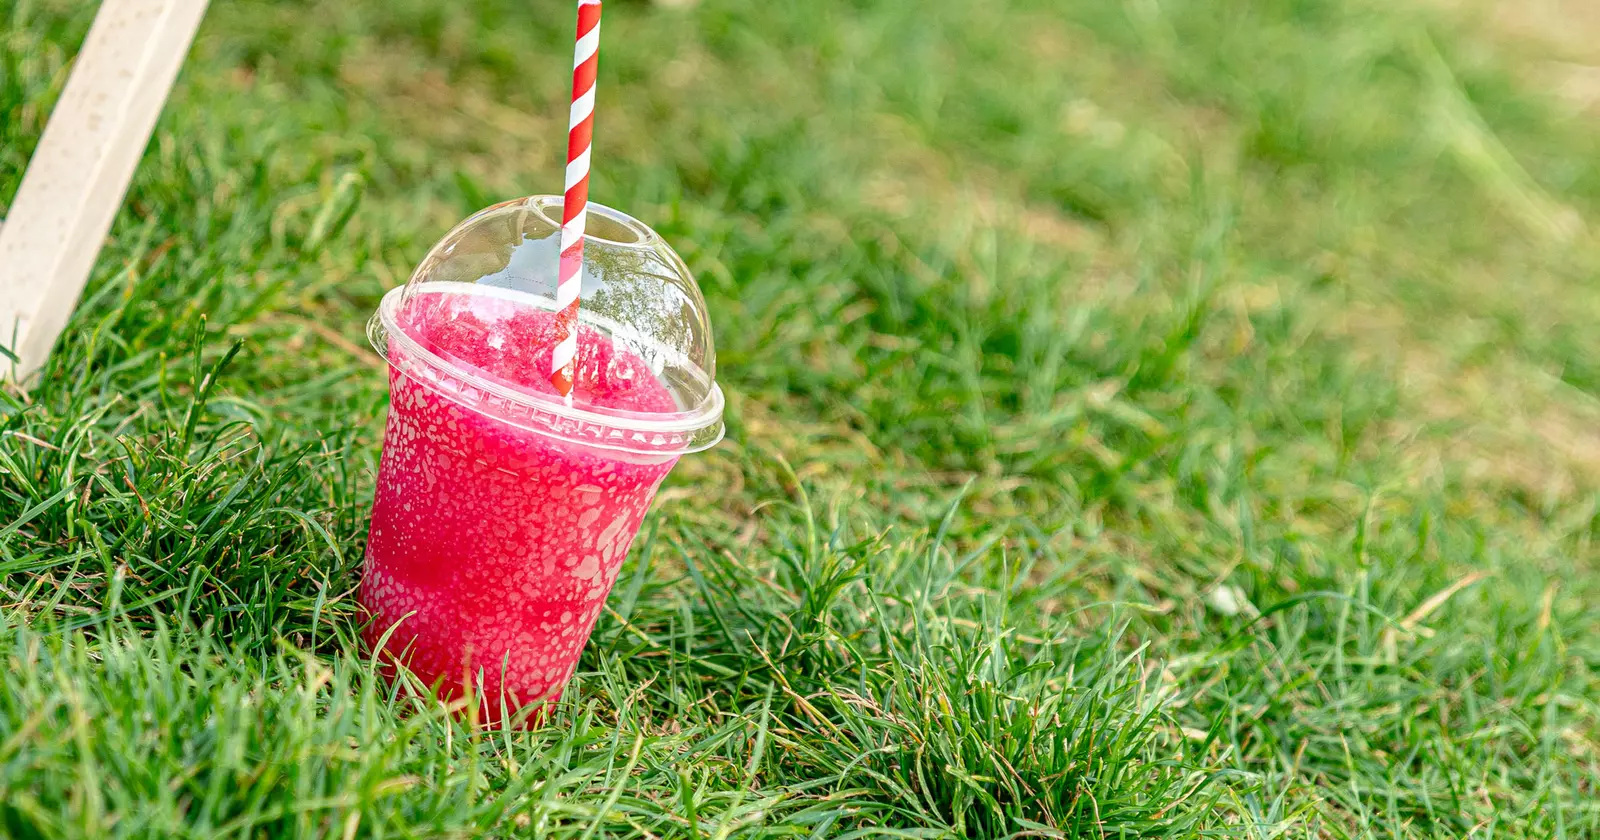 A plastic cup filled with bright red slushie mixture sits on the green grass